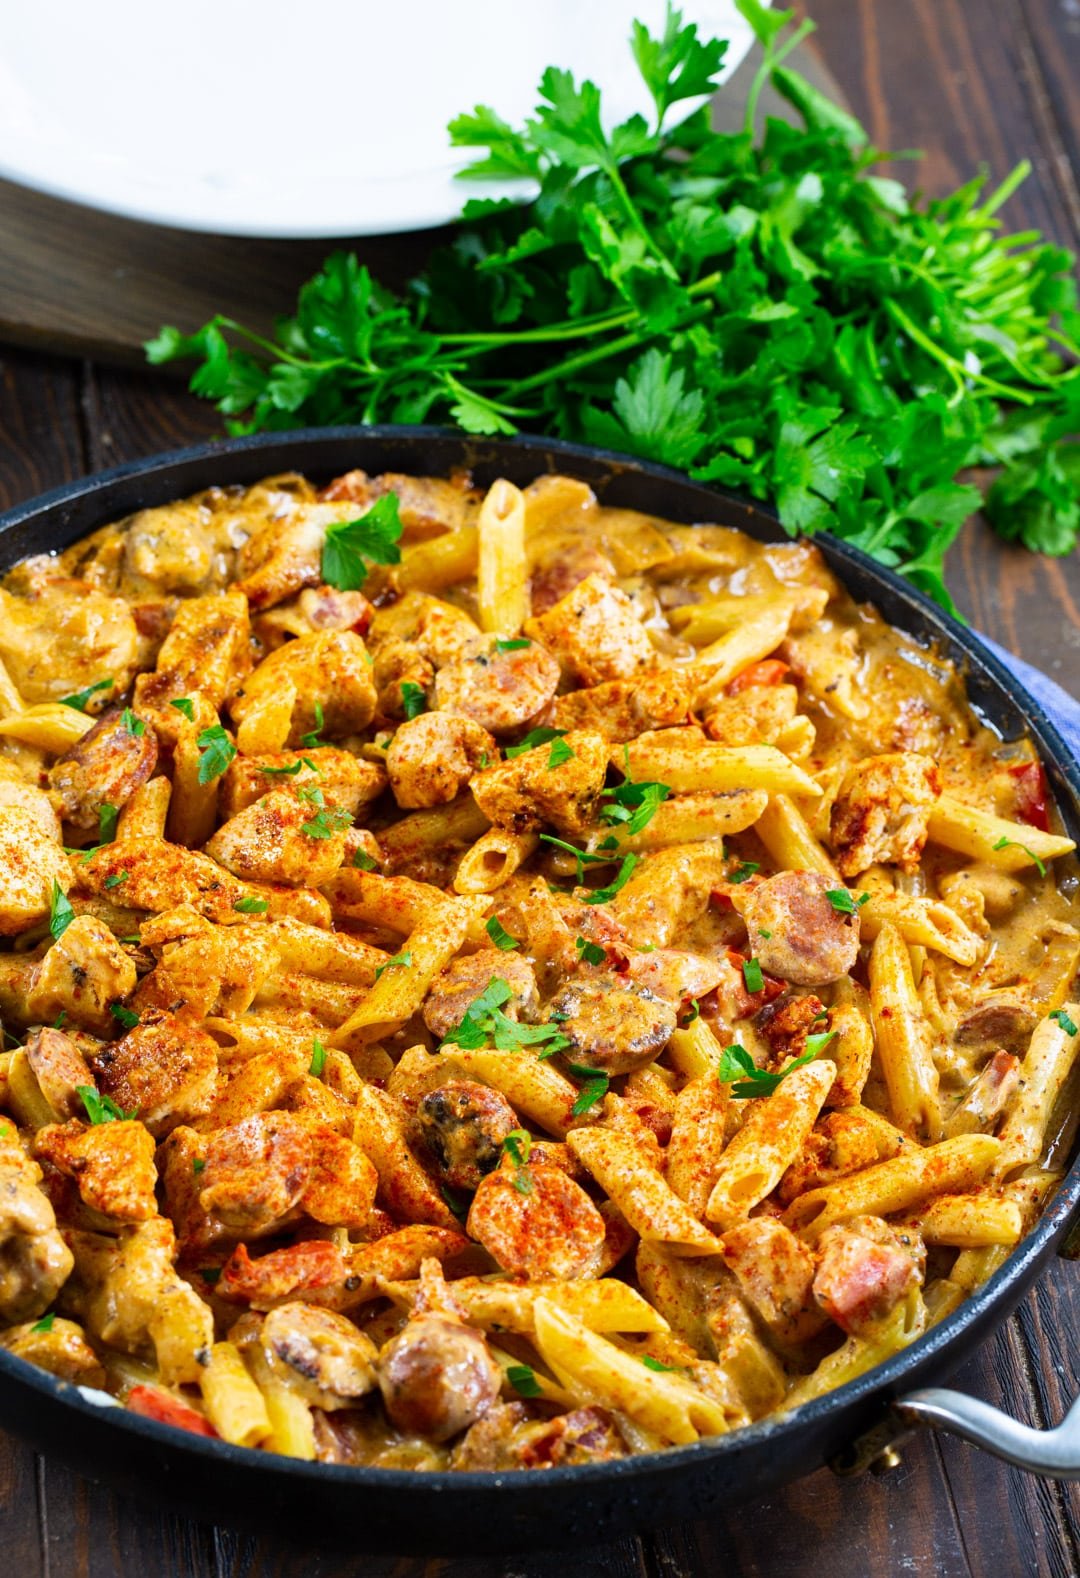 Chicken Pasta in skillet and a bunch of parsley.